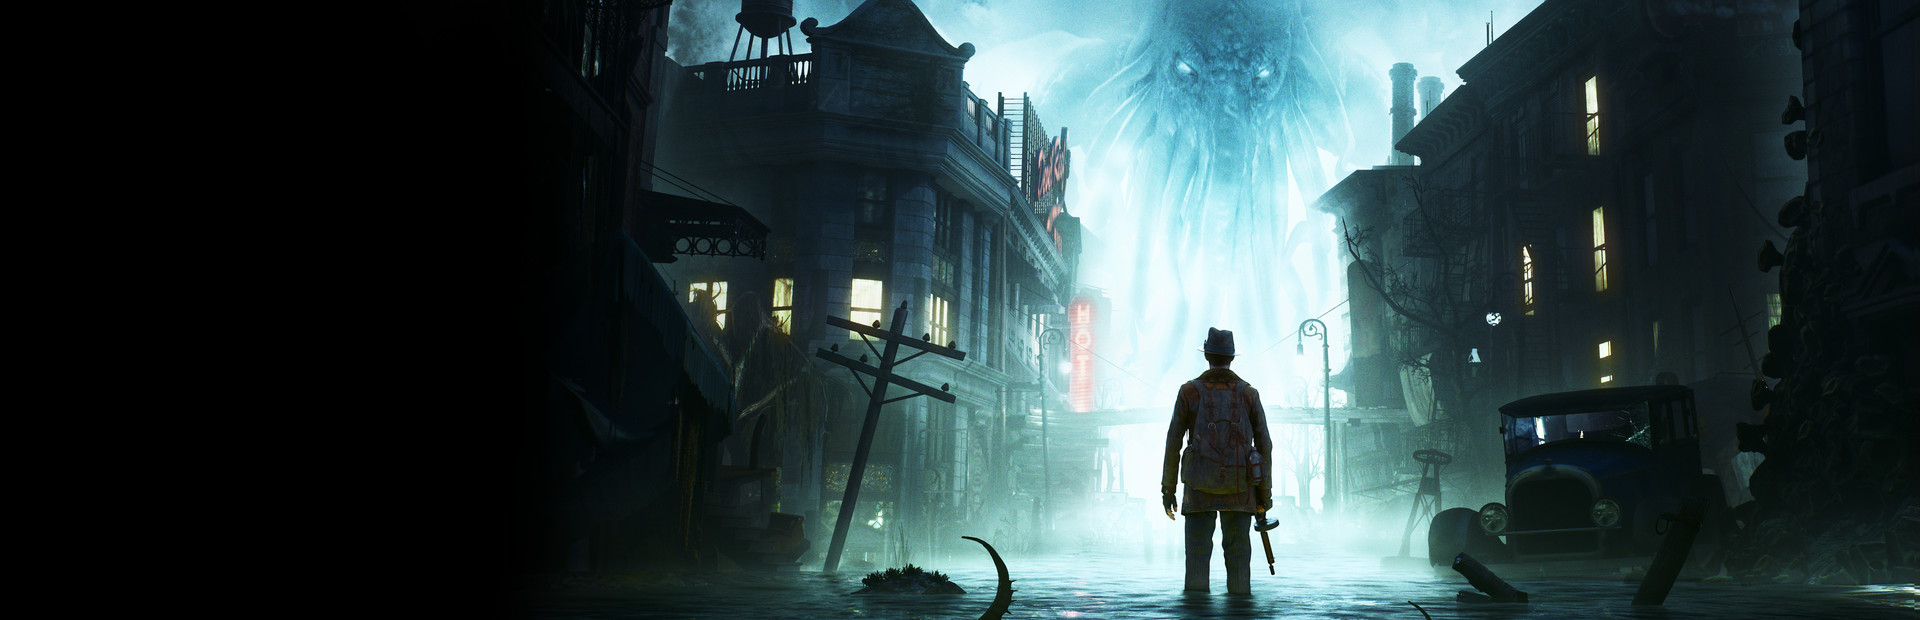 The Sinking City cover image